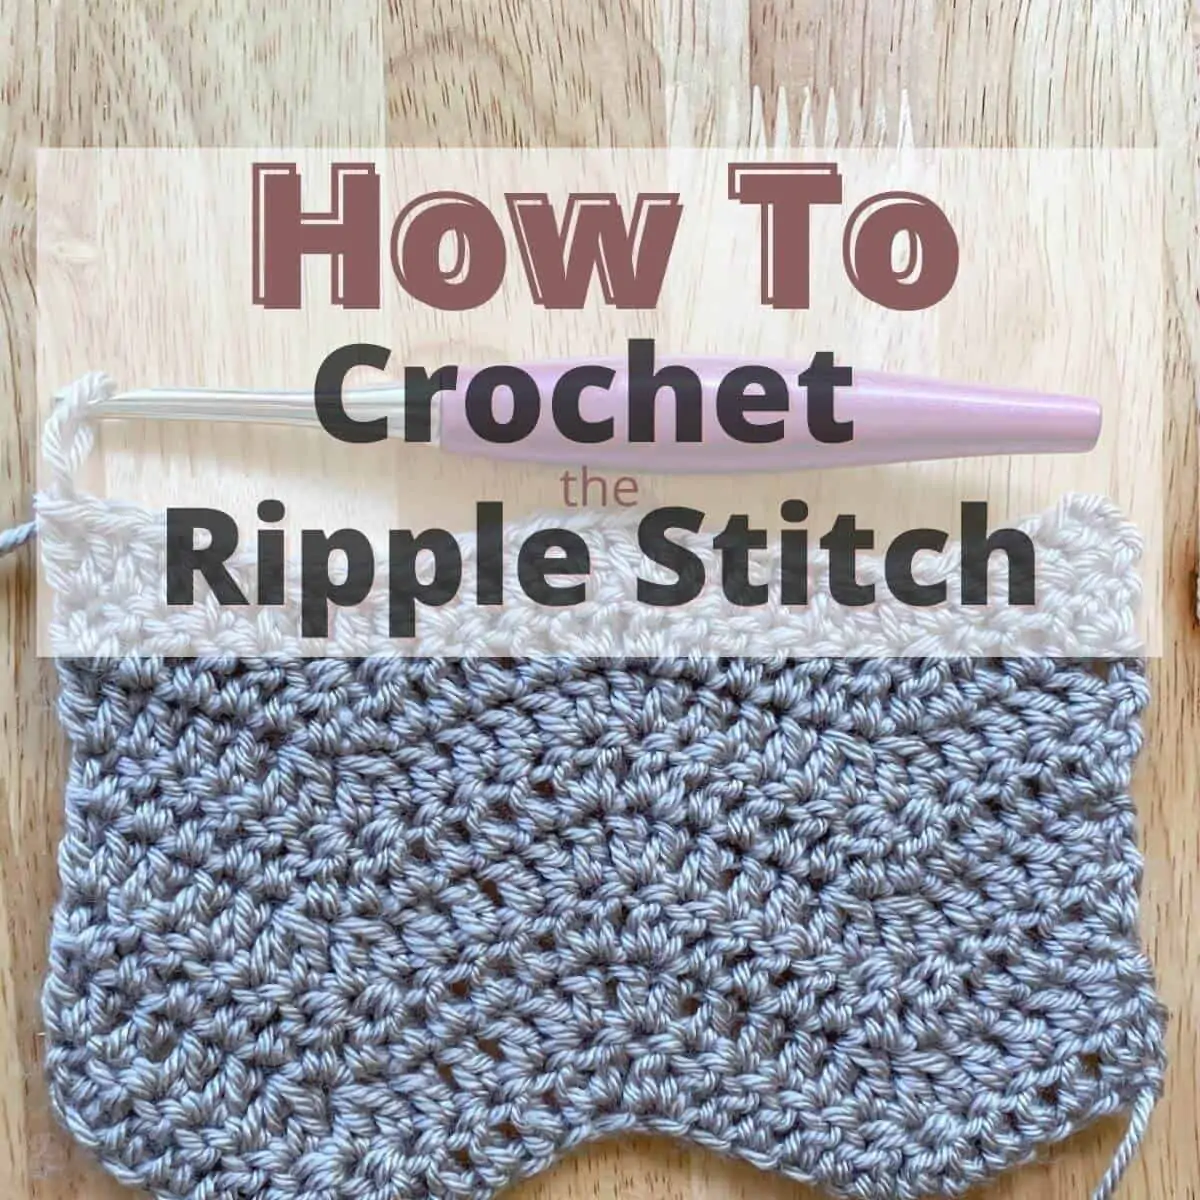 How to Double Crochet Ripple Stitch